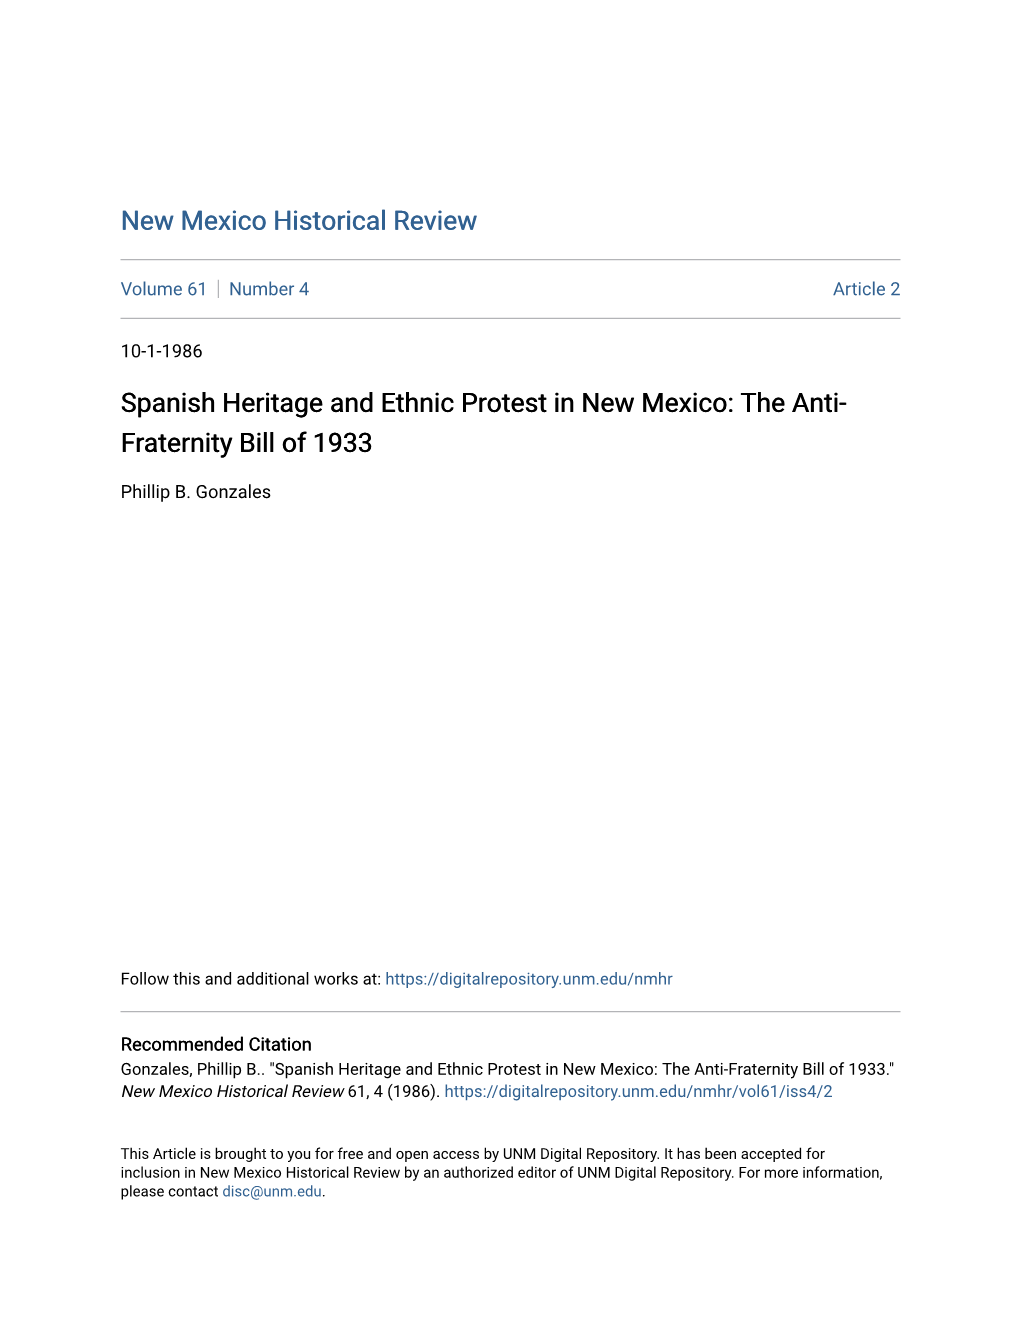 Spanish Heritage and Ethnic Protest in New Mexico: the Anti-Fraternity Bill of 1933." New Mexico Historical Review 61, 4 (1986)